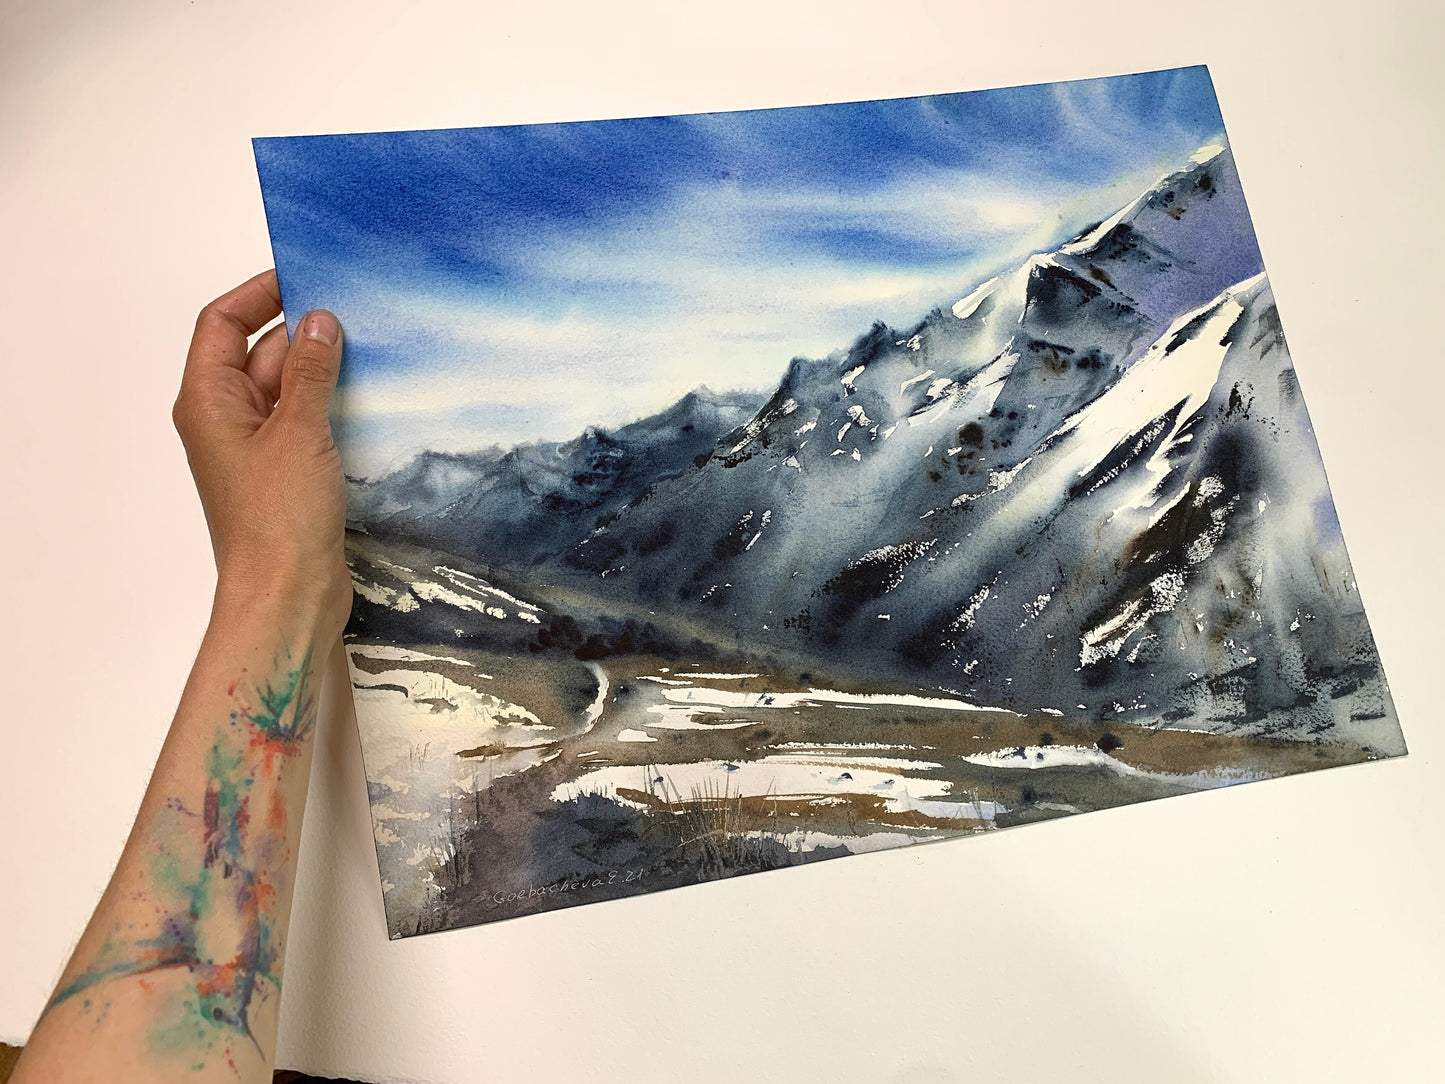 Snowy Mountains Painting, Watercolor Landscape Original, Abstract Mountain, Modern Bedroom Wall Art, Scenery Painting